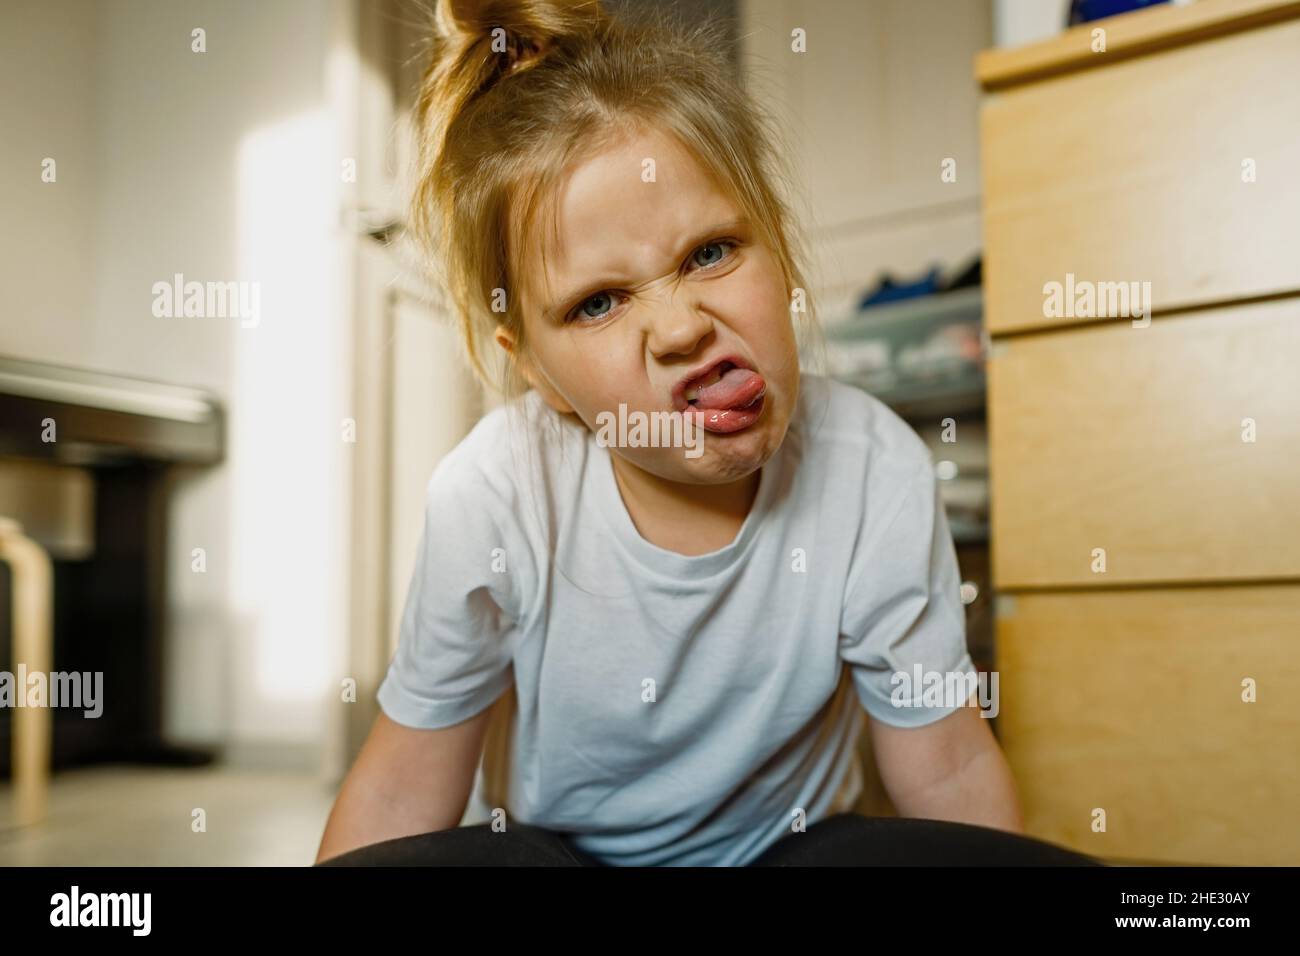 Girl 3-year old at home grimaces, makes faces Stock Photo